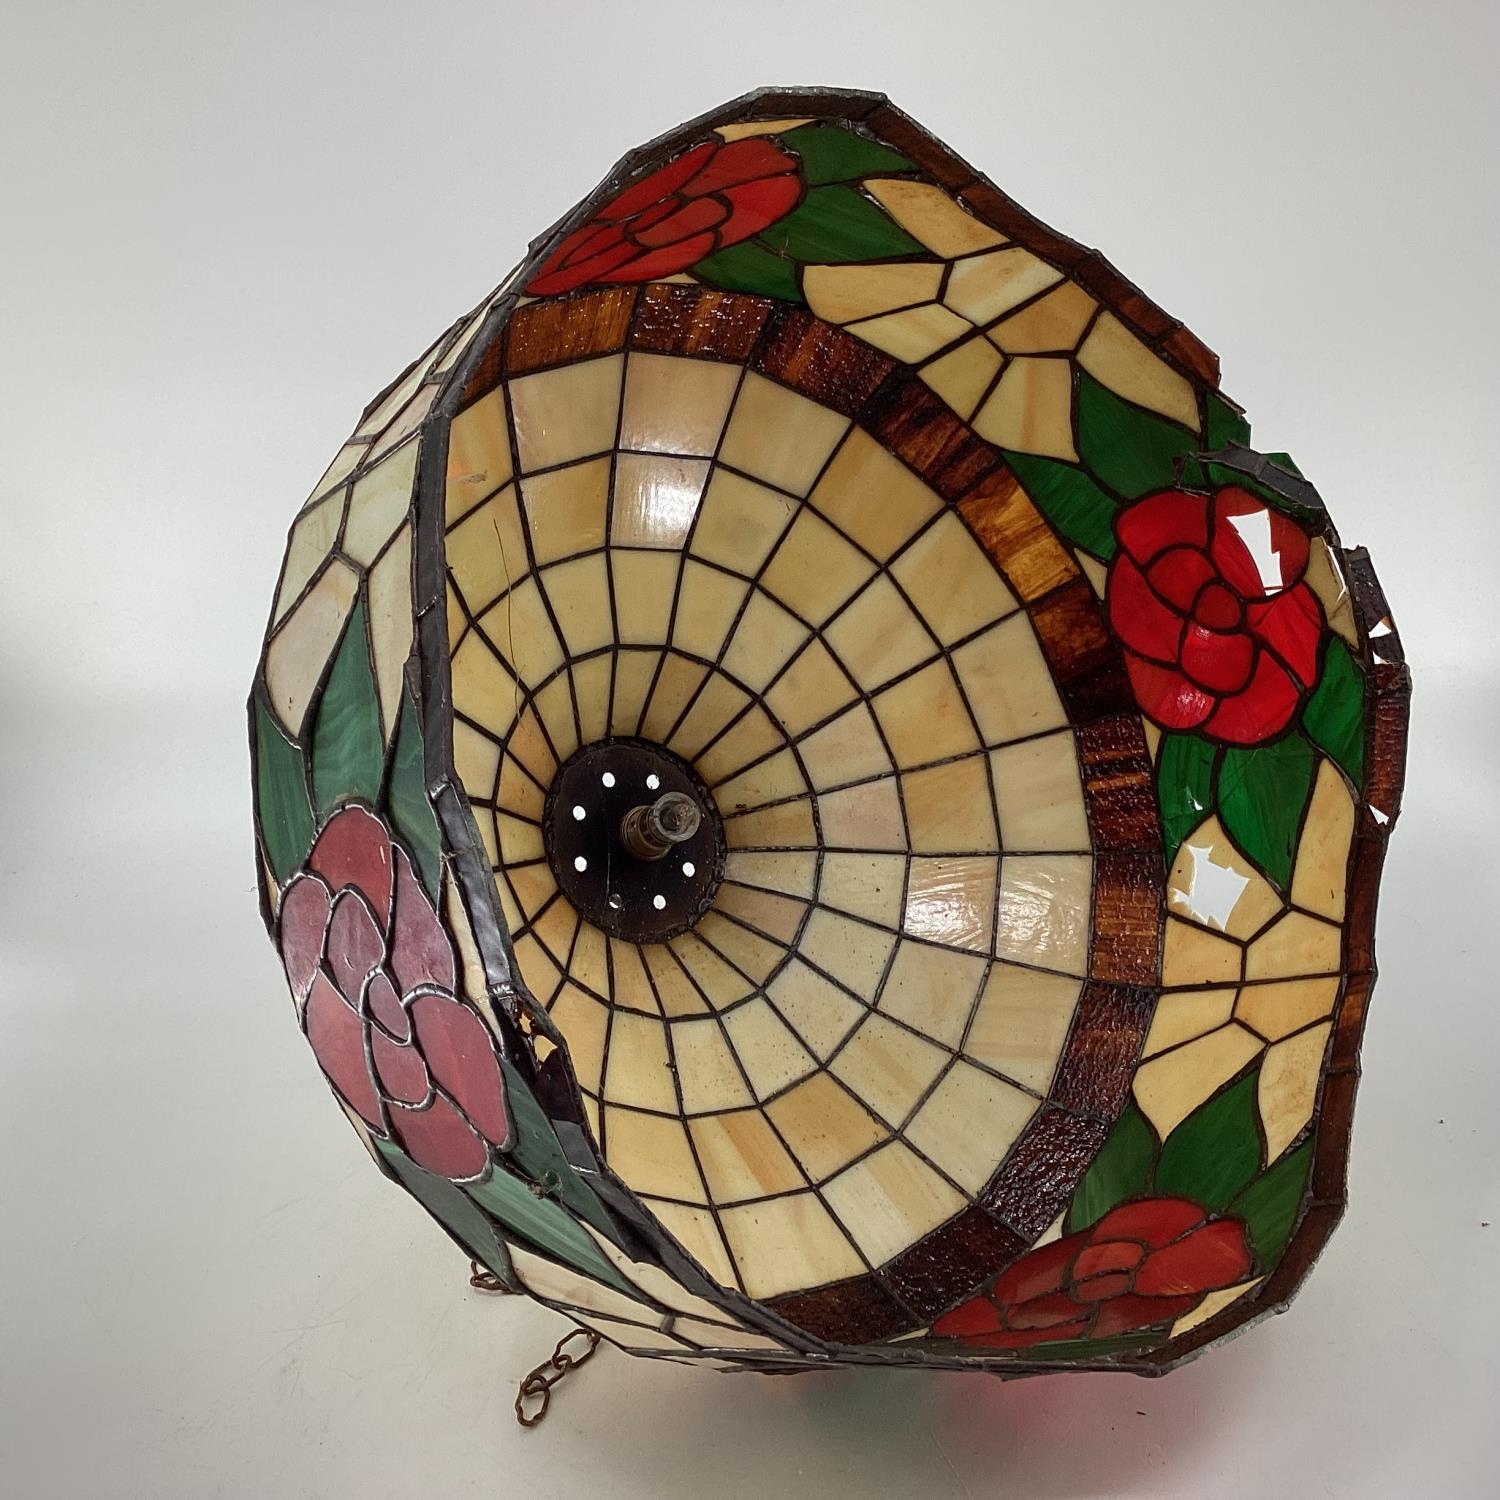 Large Tiffany Style lead glass celling lamp shade, some damage and losses, 53cm d - Image 7 of 8